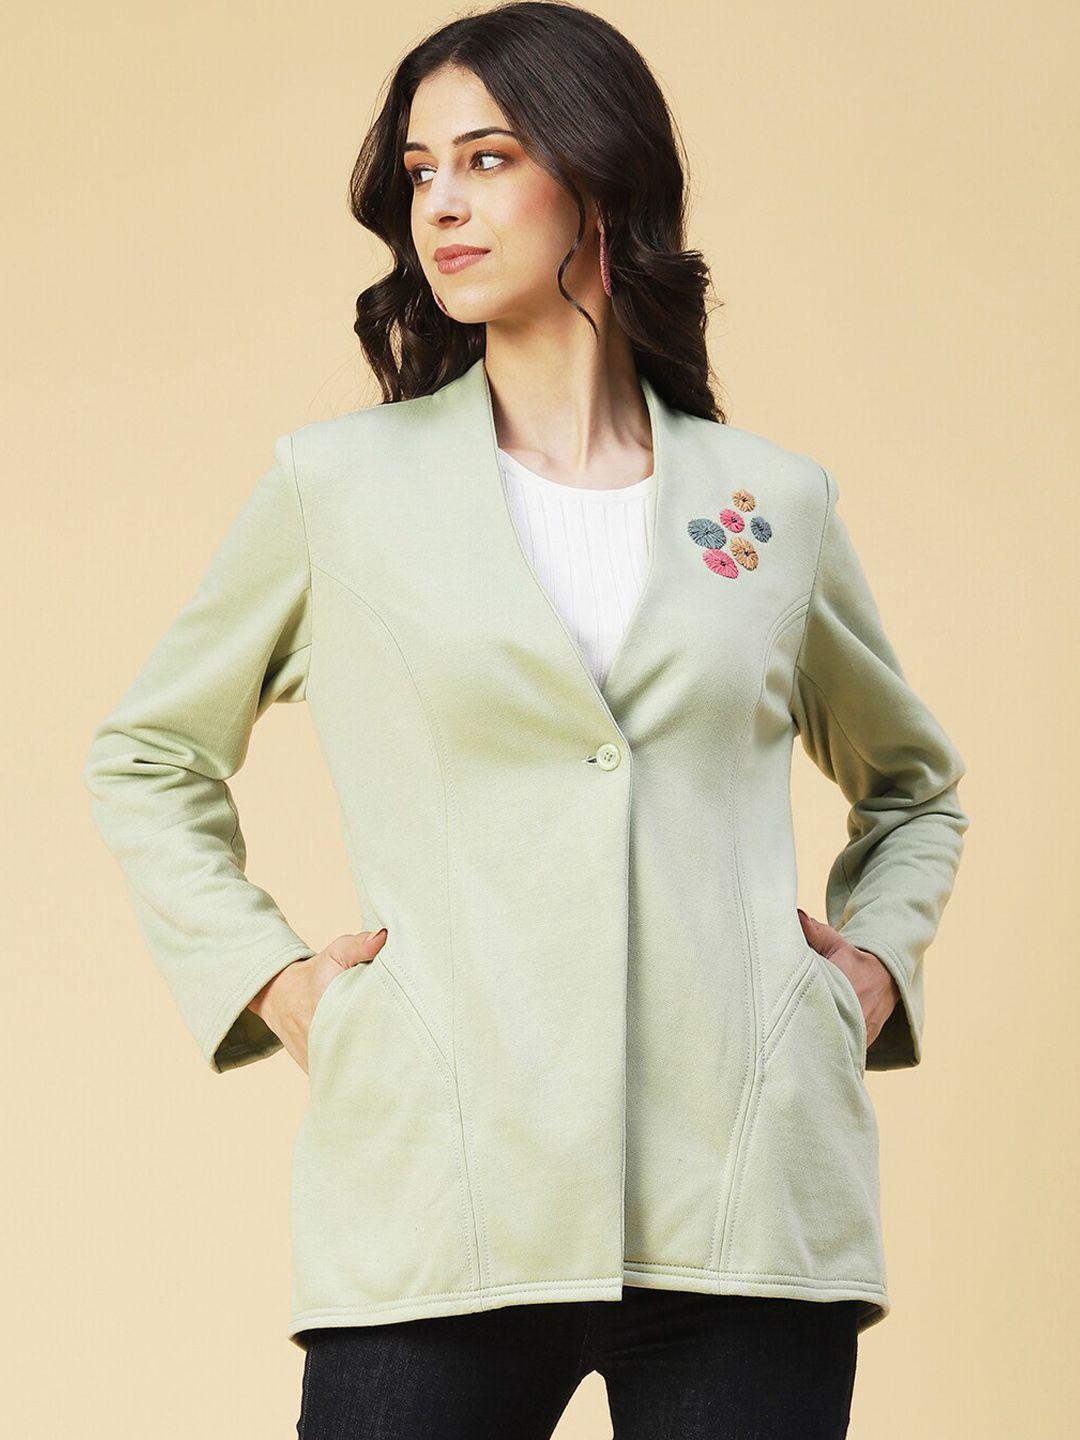 fashor lightweight tailored jacket with embroidery details